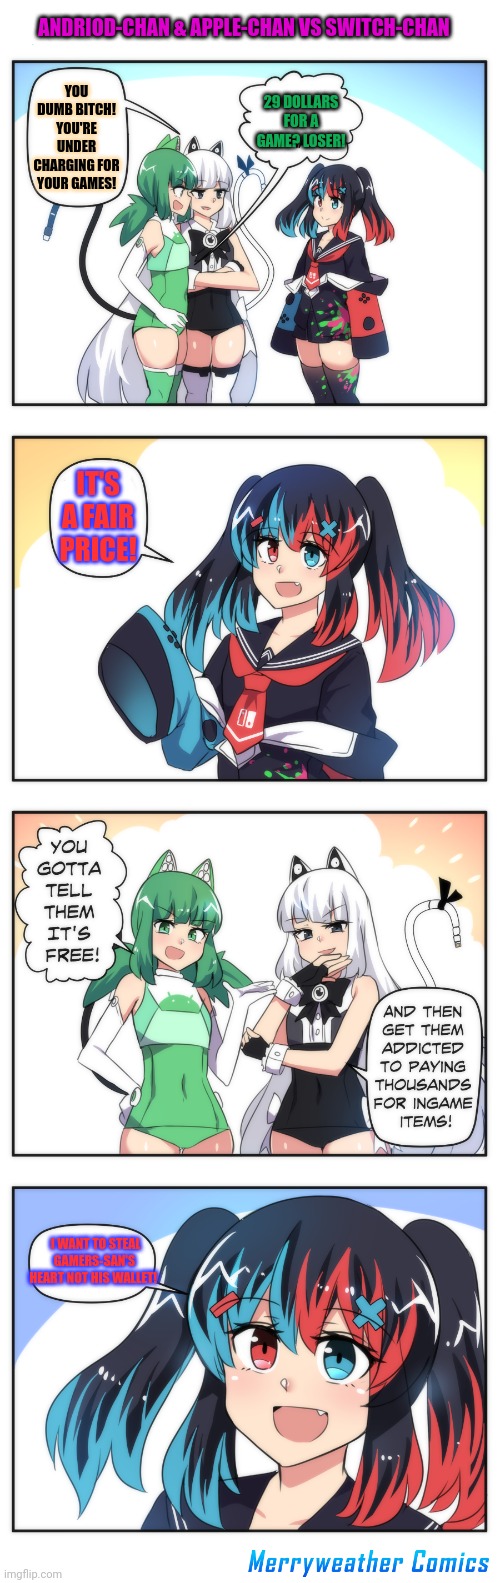 ANDRIOD-CHAN & APPLE-CHAN VS SWITCH-CHAN; YOU DUMB BITCH! YOU'RE UNDER CHARGING FOR YOUR GAMES! 29 DOLLARS FOR A GAME? LOSER! IT'S A FAIR PRICE! I WANT TO STEAL GAMERS-SAN'S HEART NOT HIS WALLET! | image tagged in andriod chan,apple chan,switch chan,anime girl | made w/ Imgflip meme maker